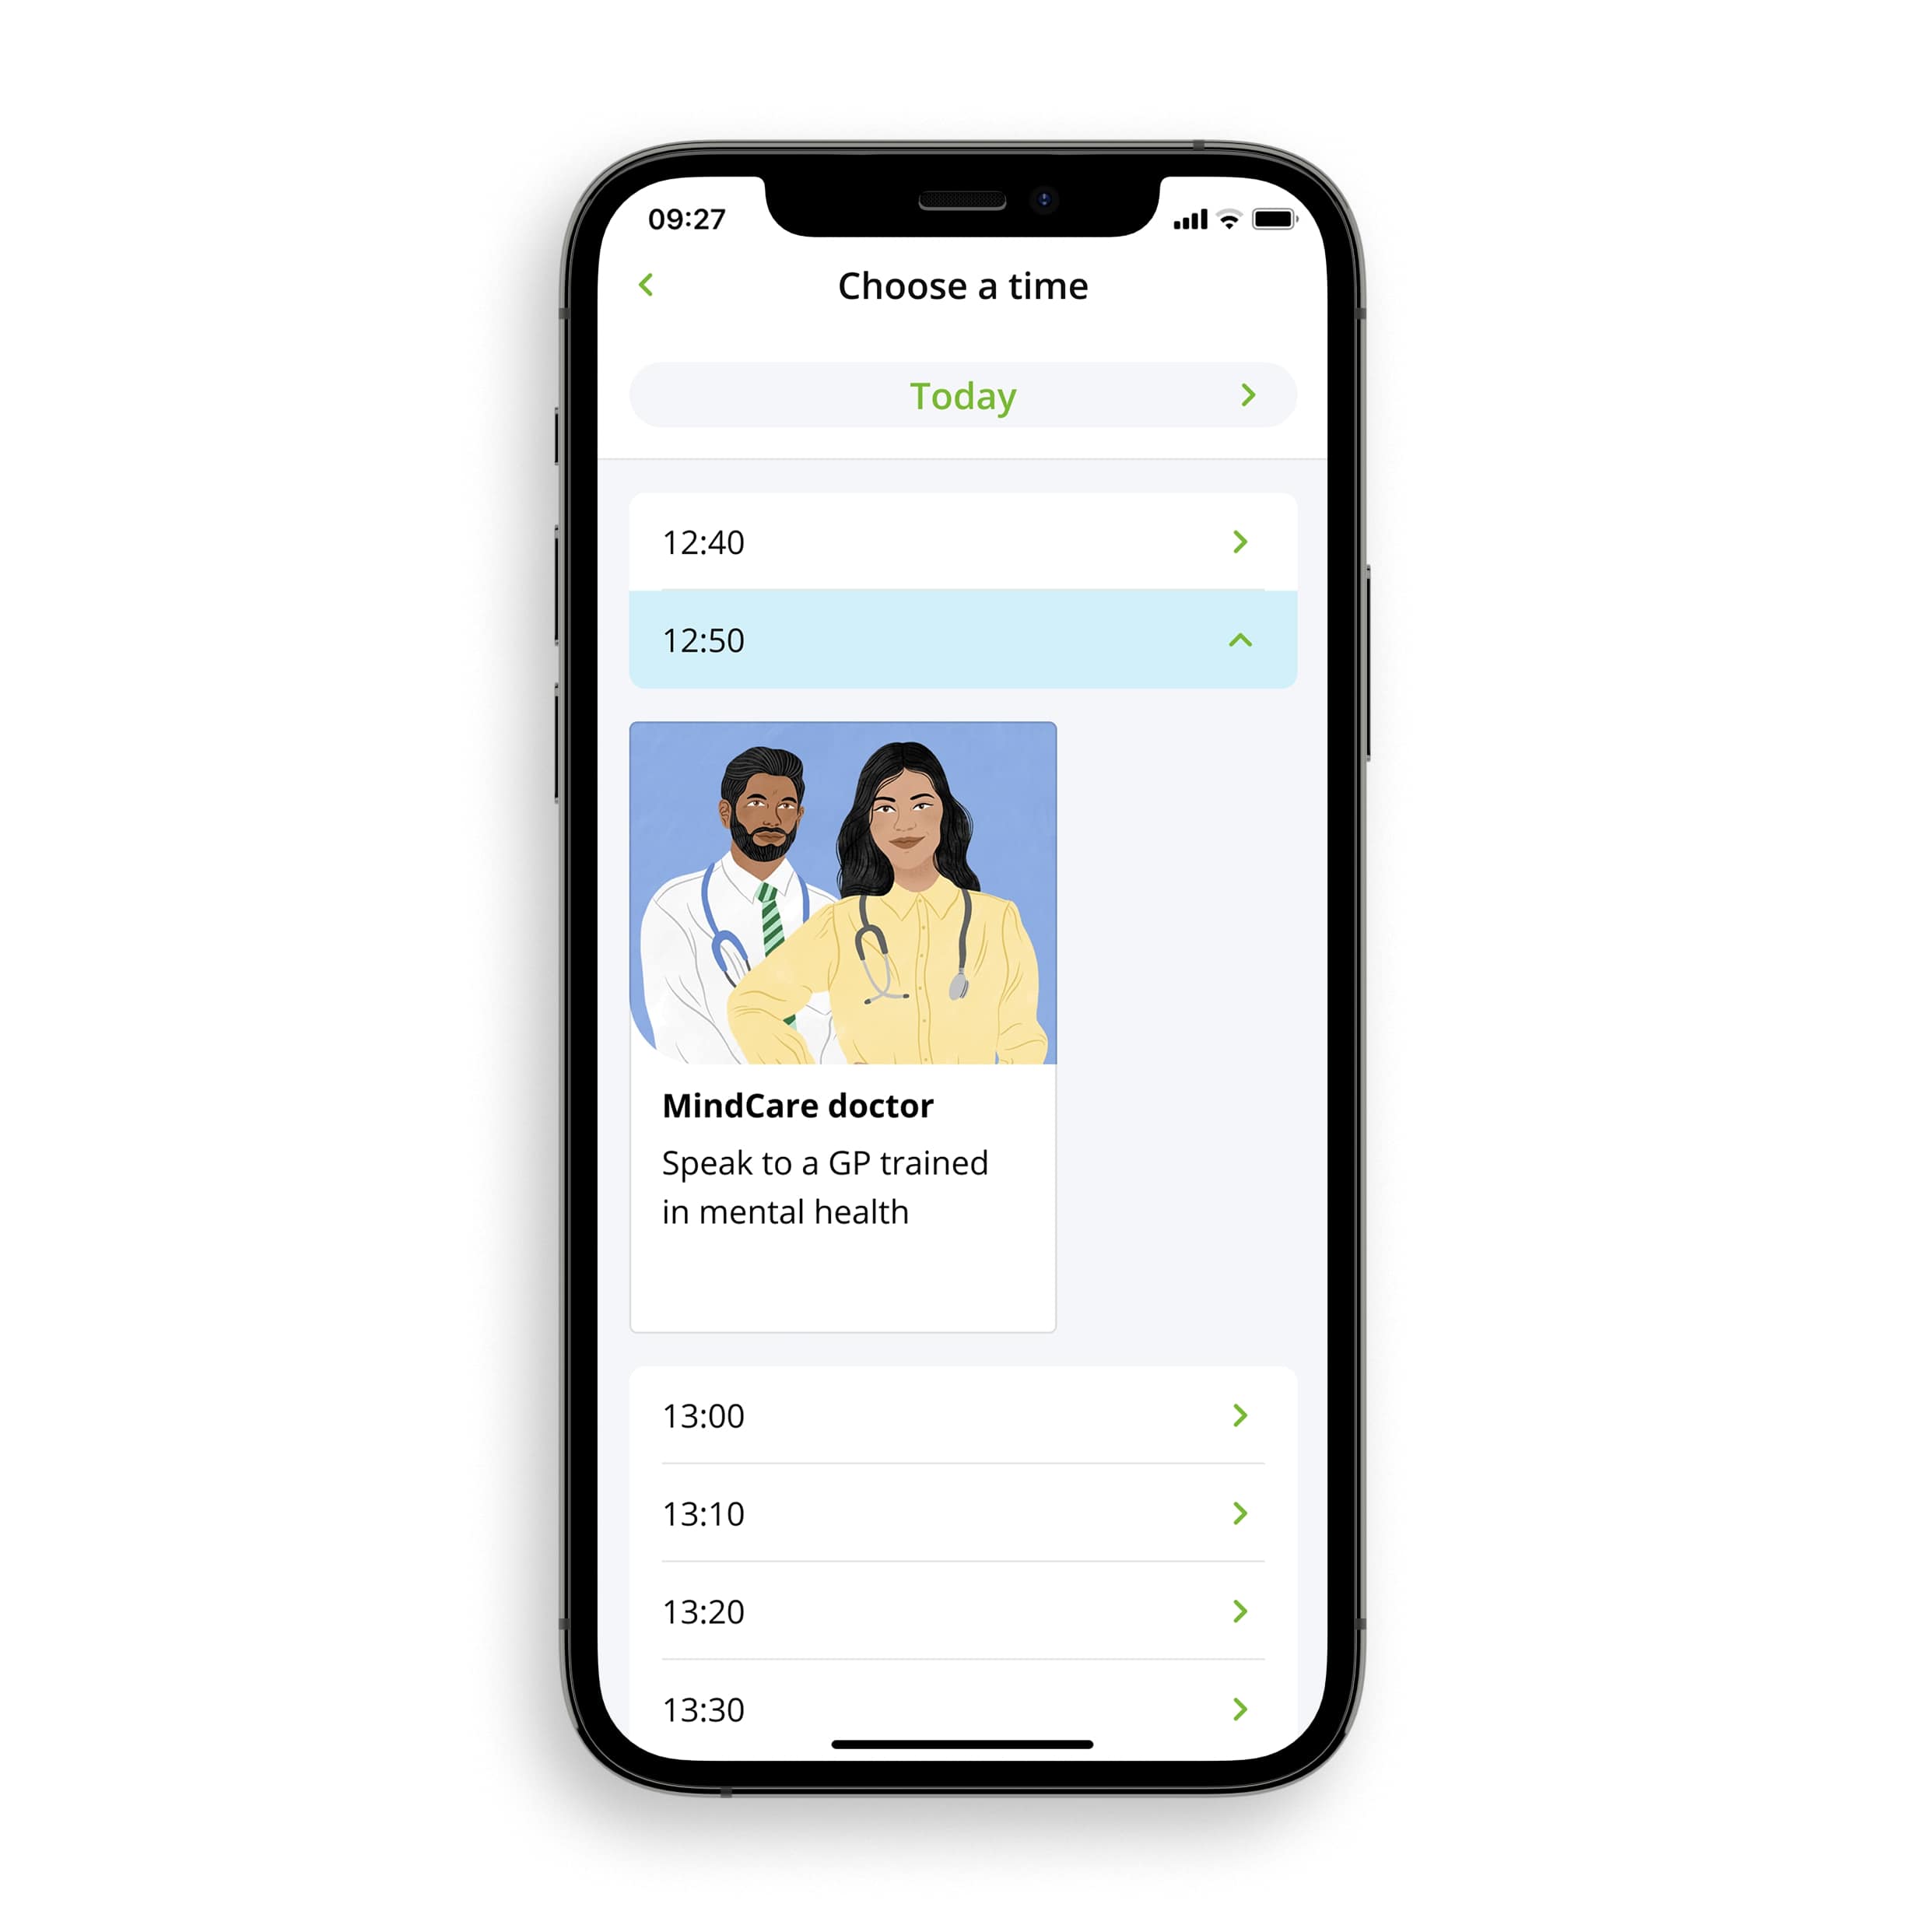 Screenshot of MindCare app showing how to book an appointment with a doctor for mental health diagnosis